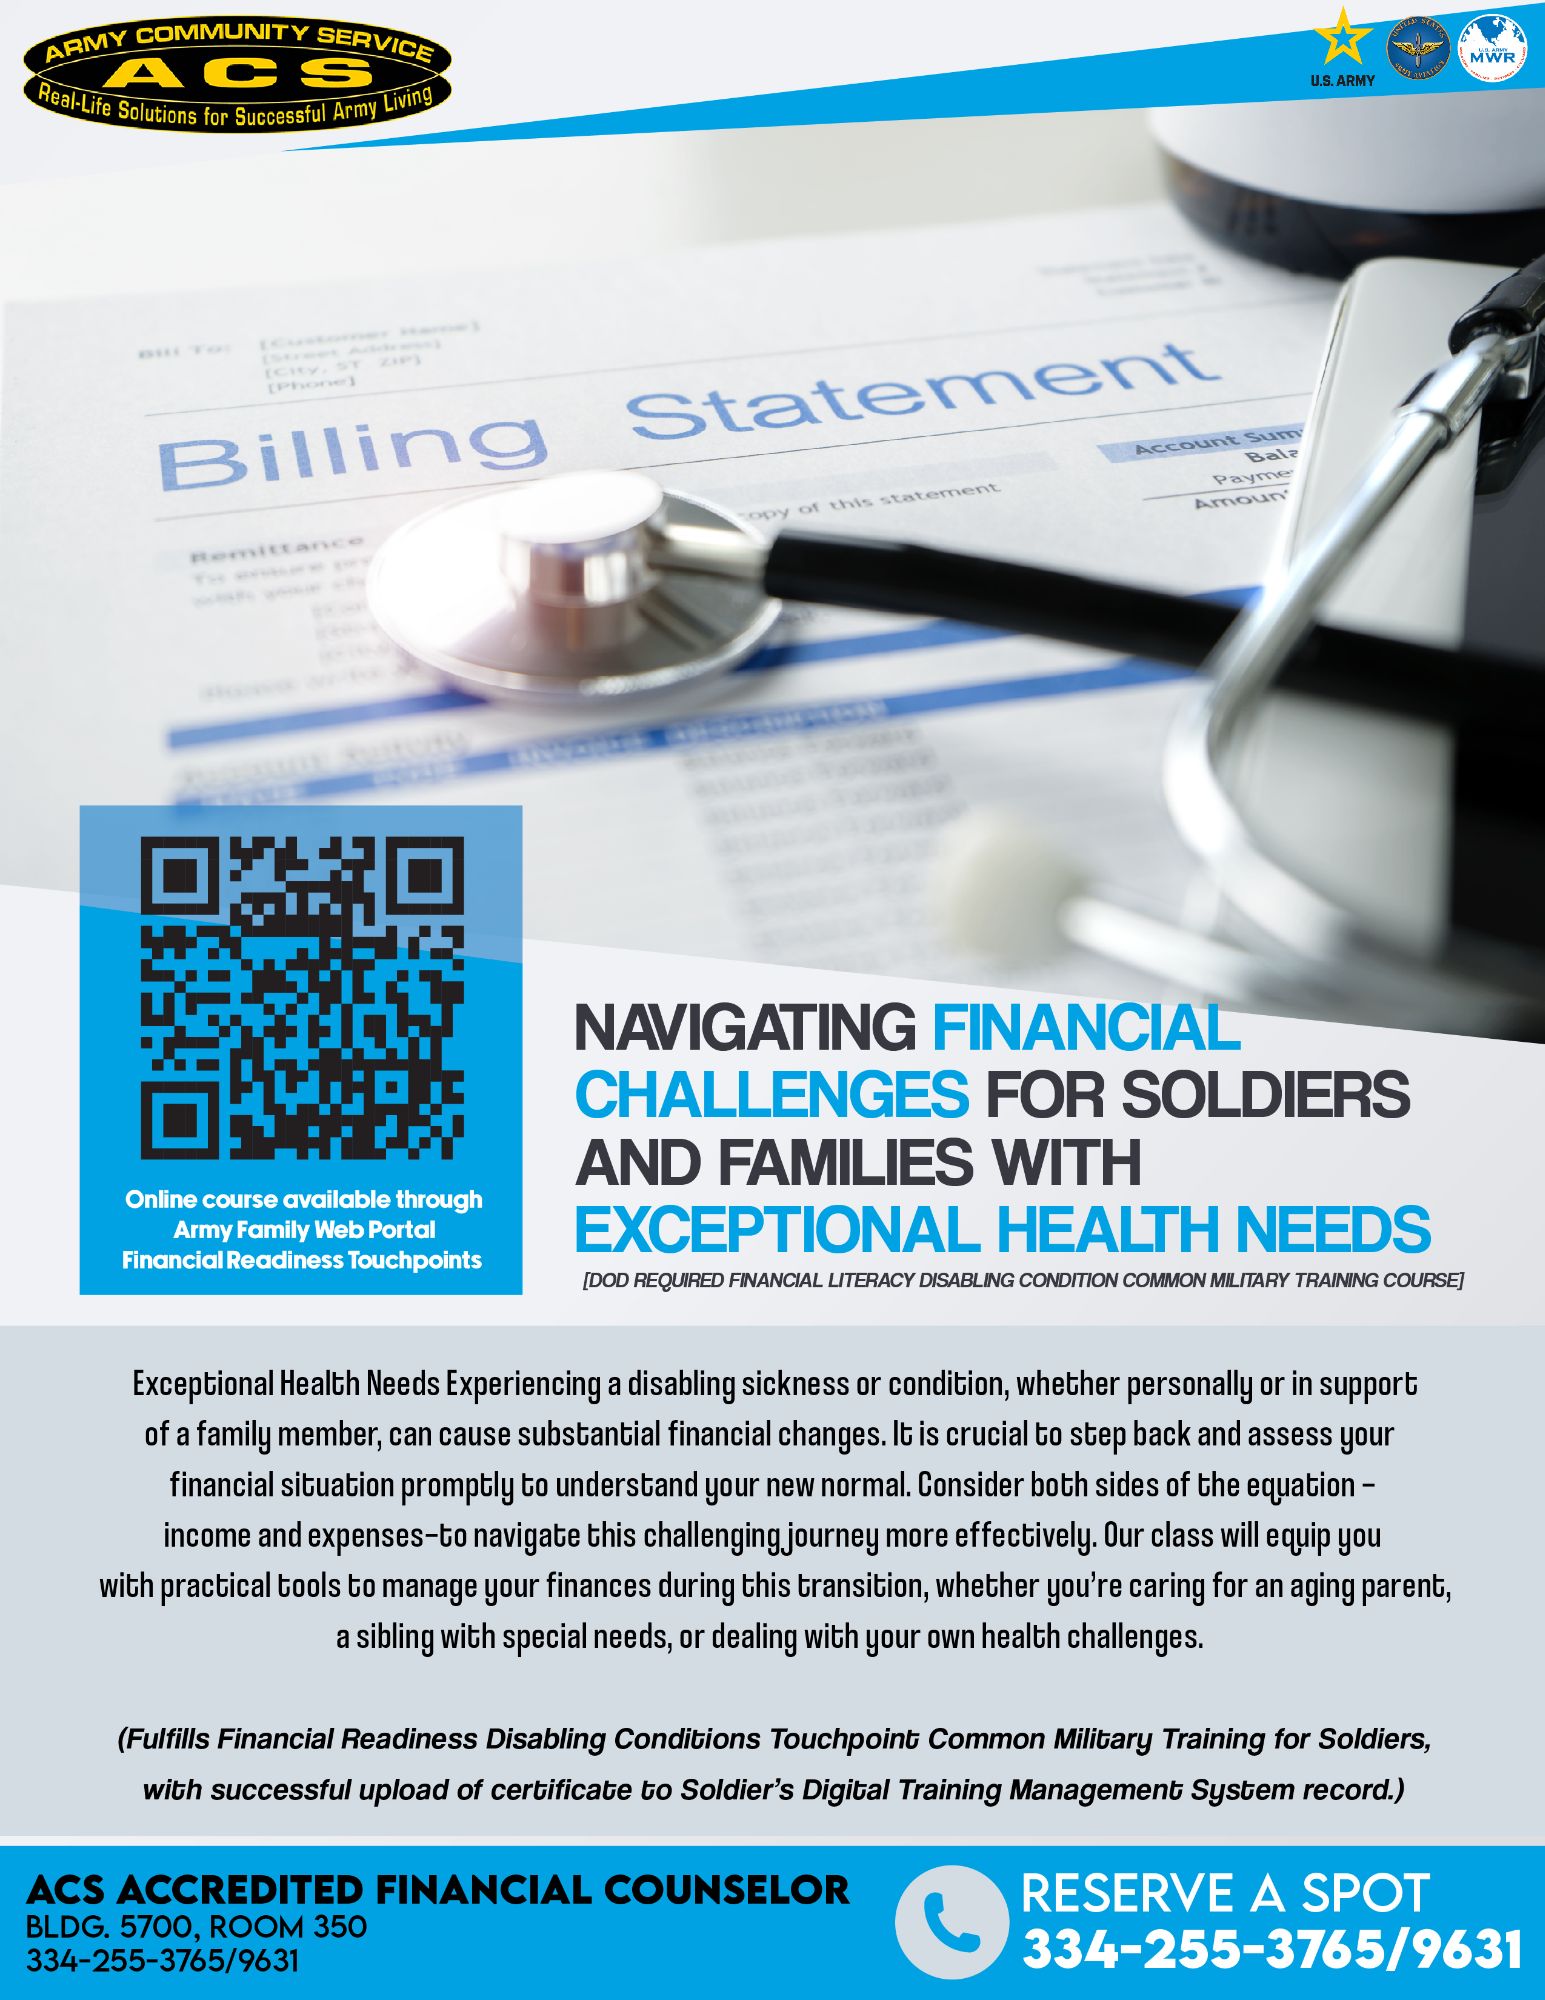 Navigating_Financial_Challenges_for_Soldiers_and_Familes_with_Exceptional_Health_Needs.jpg